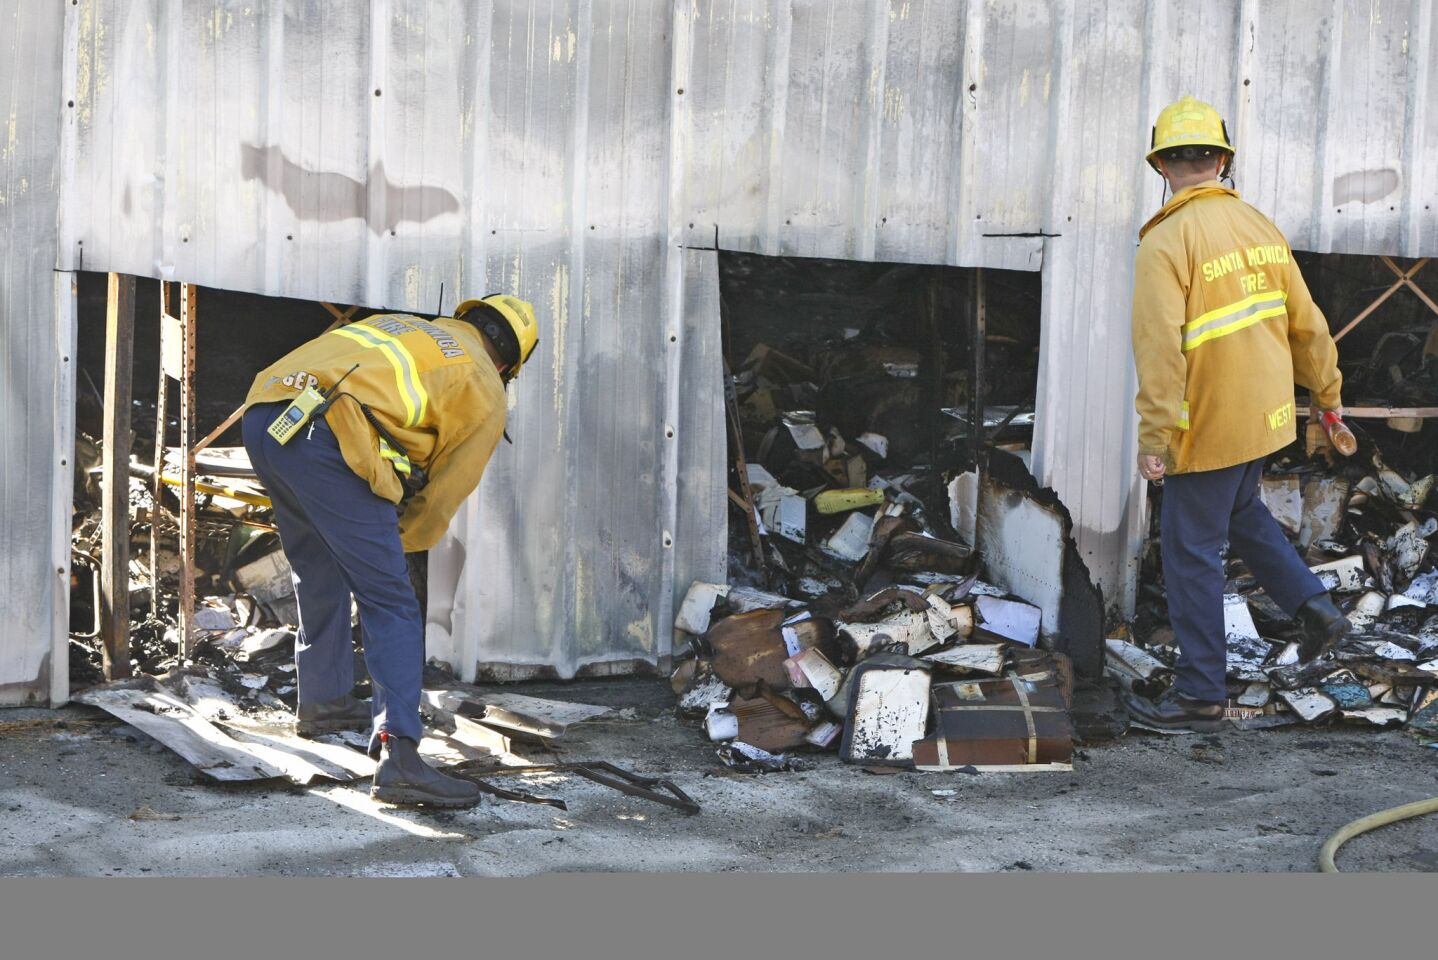 Santa Monica firefighters look through burned debris at the back side of an aircraft hangar where a private jet crashed and burned Sunday evening.